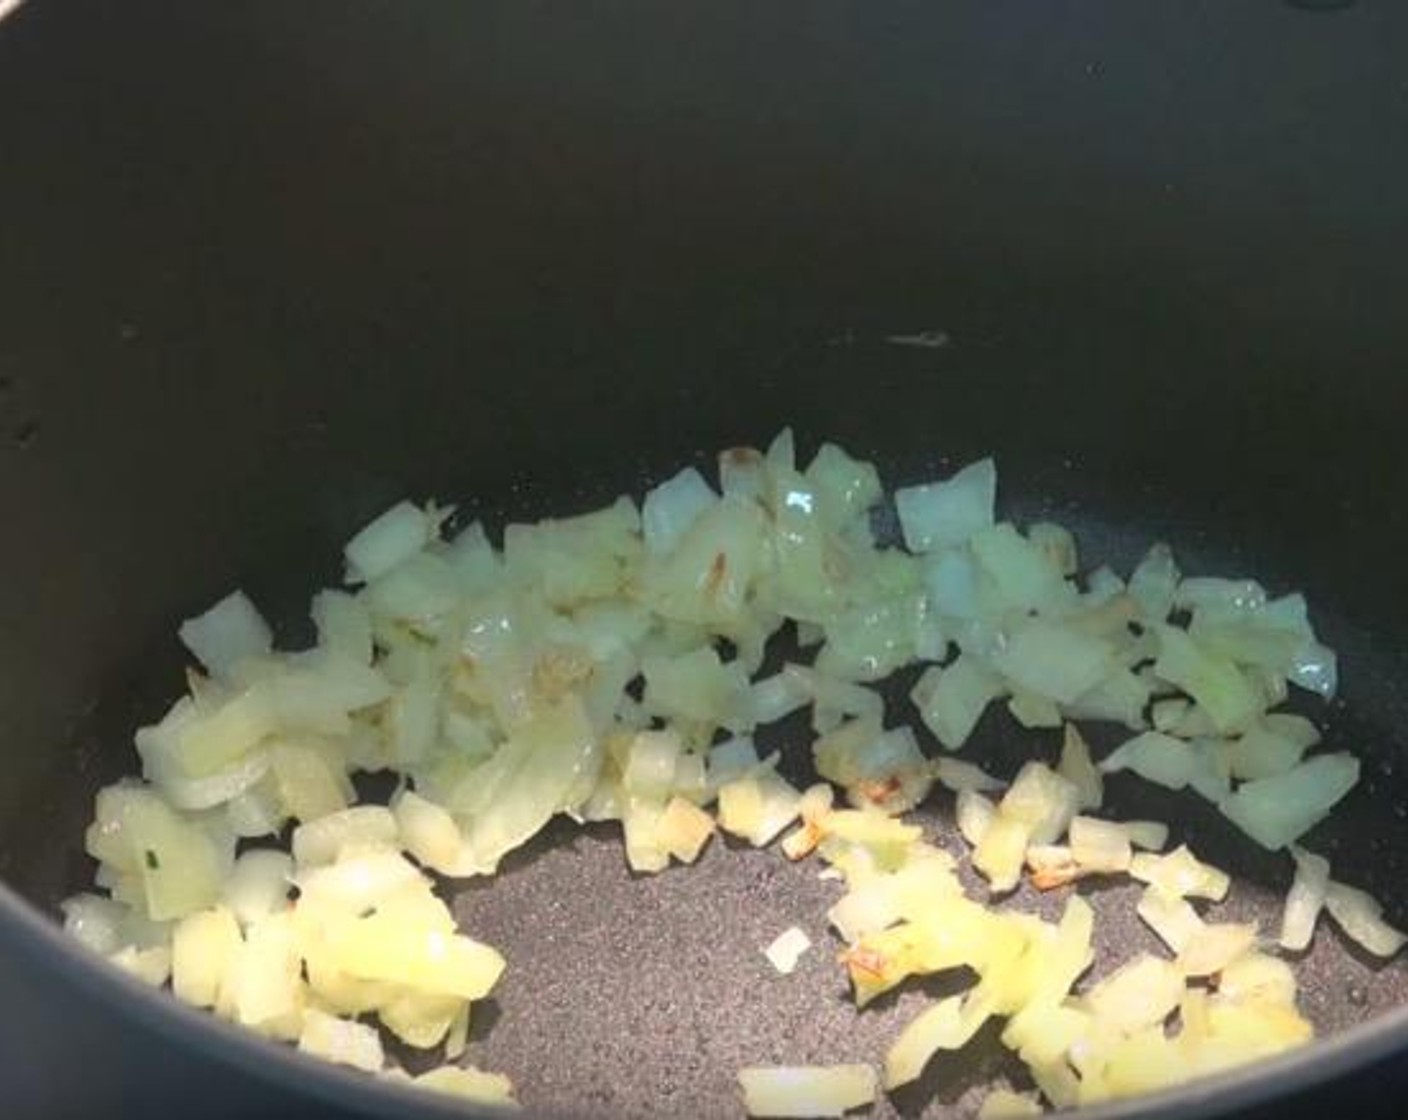 step 1 In a large saucepan over medium heat, add Olive Oil (1 Tbsp), Garlic (1 clove) and Yellow Onion (1). Cook for 2-3 minutes, or until onions have softened.